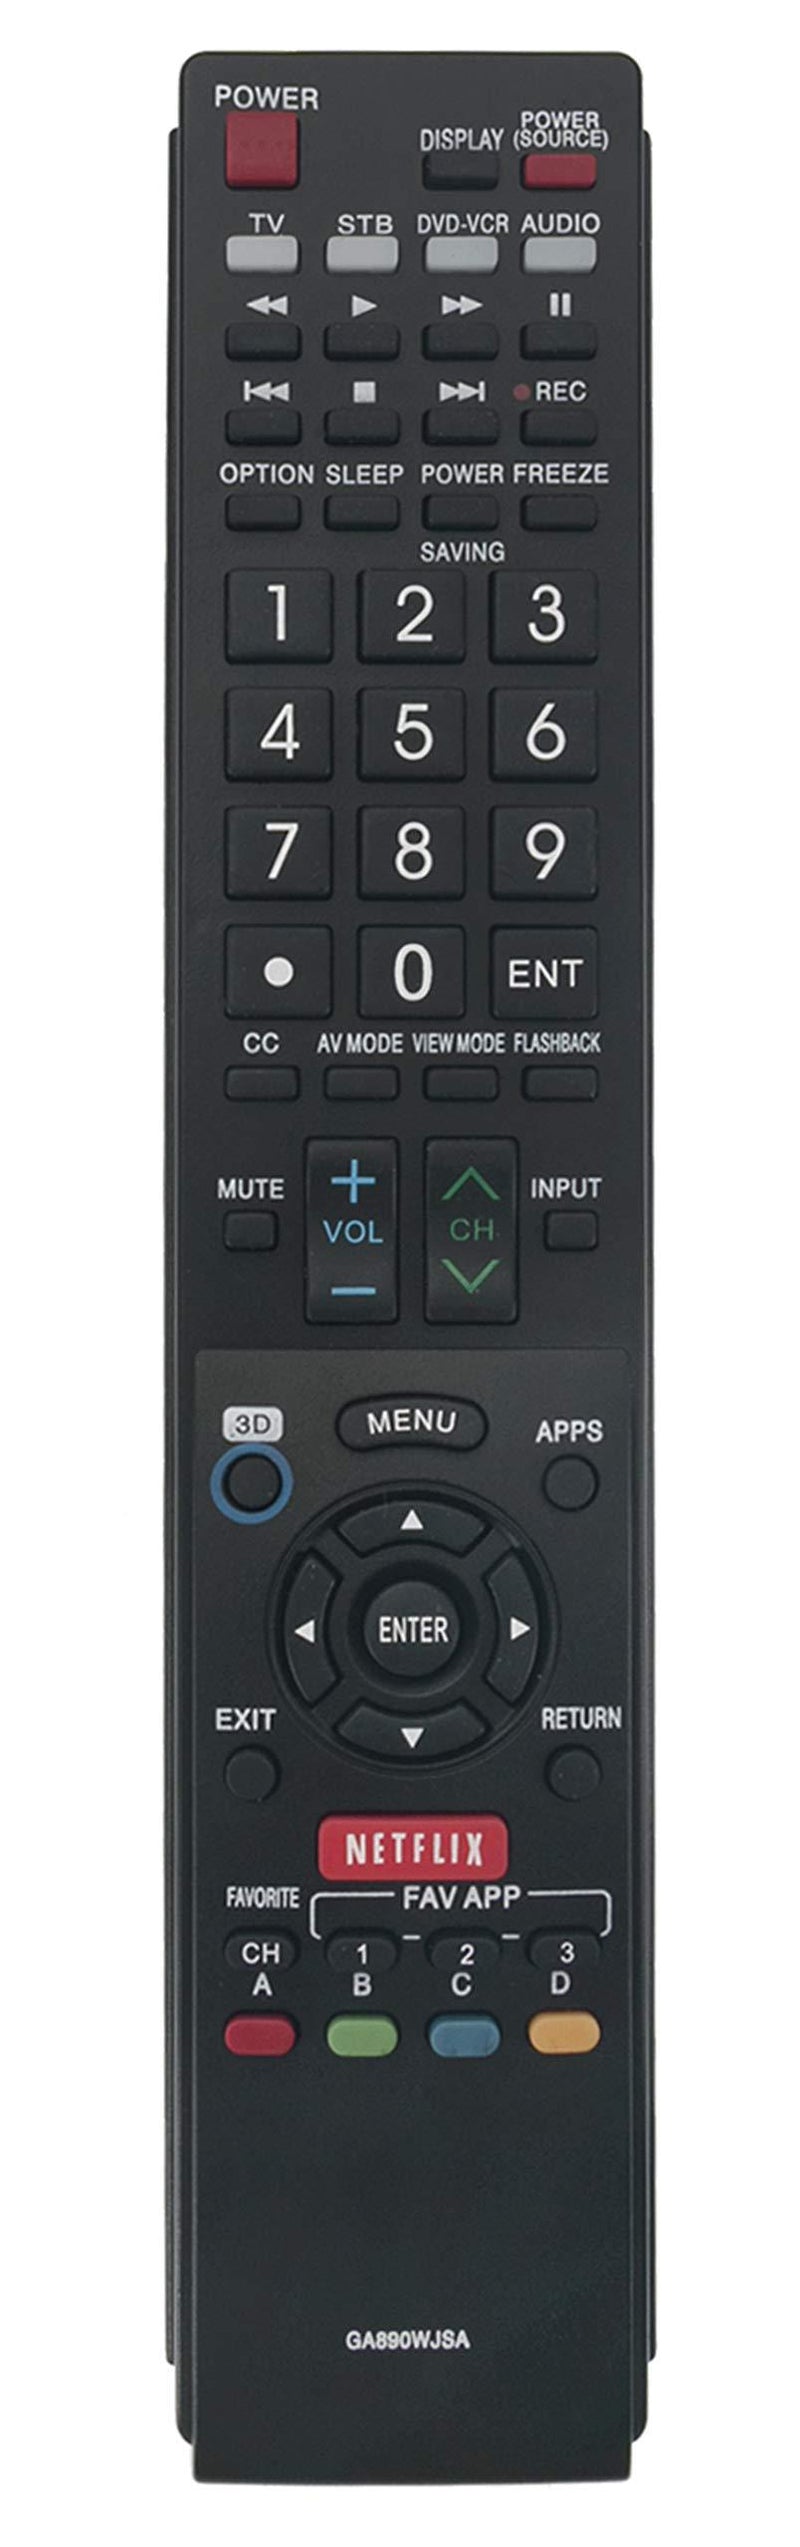 Vinabty New Replace Remote GA890WJSA fit for Sharp TV LC70C6500 LC70C6500U LC70C7500 LC70C7500U LC70LE640 LC70LE640U LC70LE650 LC70LE650U LC70LE750 LC70LE750U Sub GB004WJSA GA935WJSA GB005WJSA